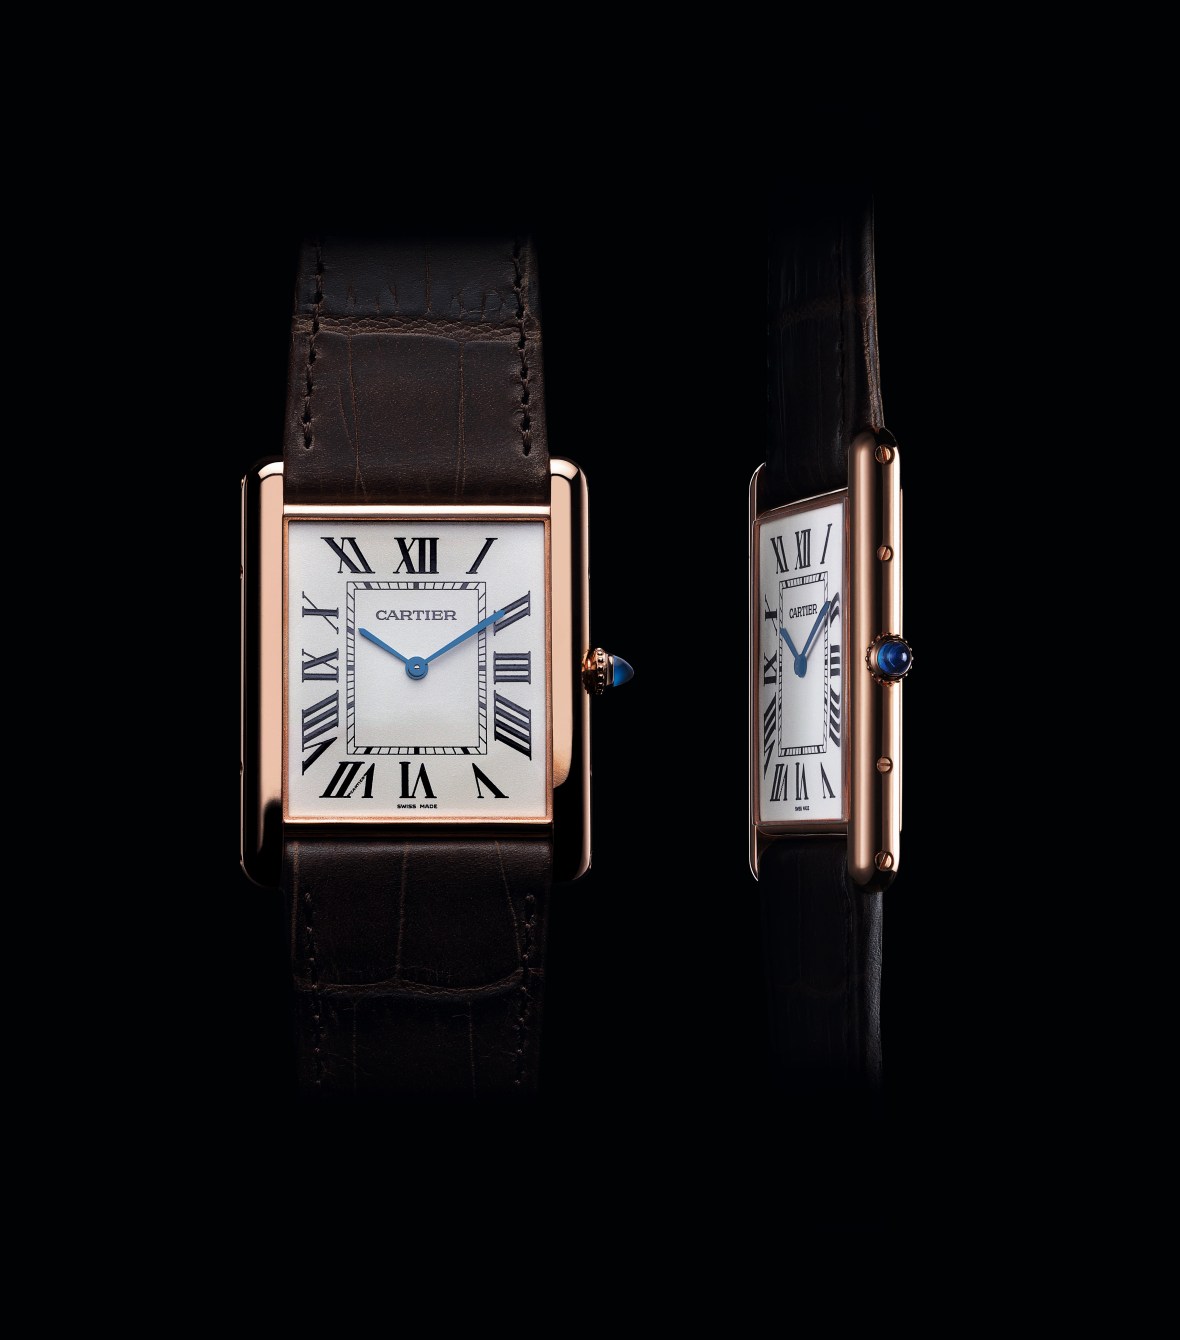 The most iconic Cartier watches ever made, and who wears them